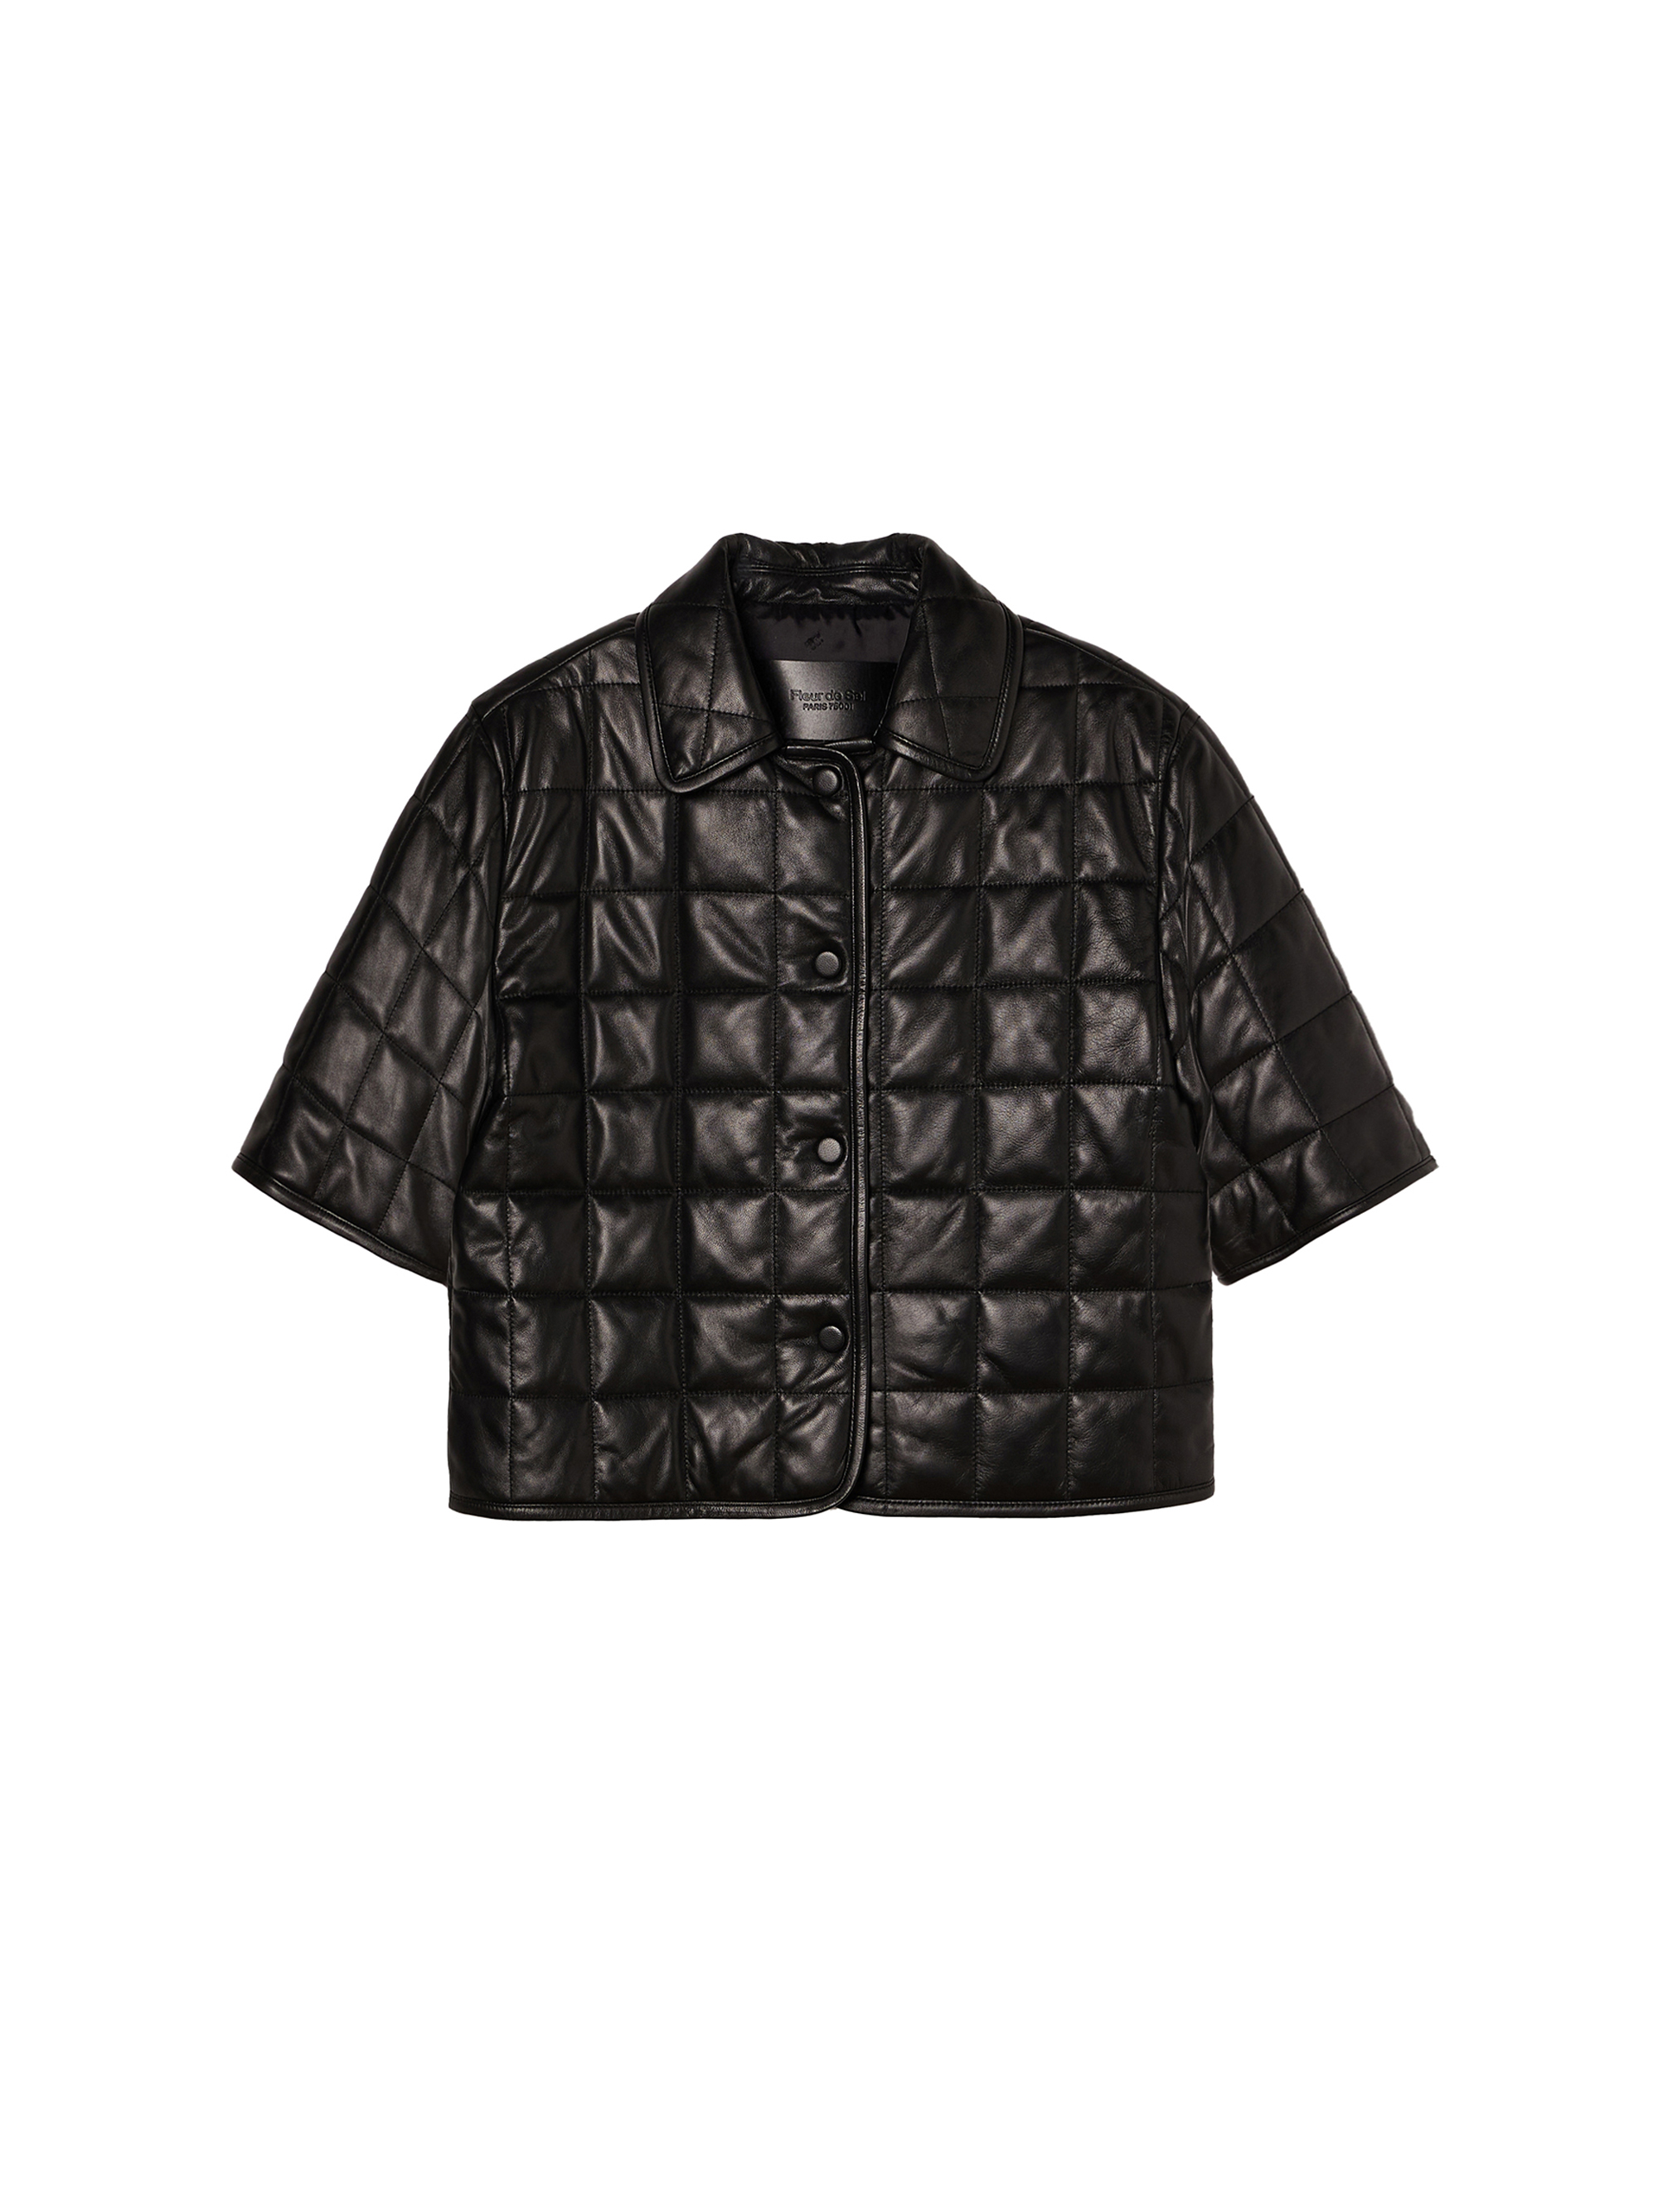 Lamb Leather Quilted Jacket / 램 레더 퀼팅 자켓